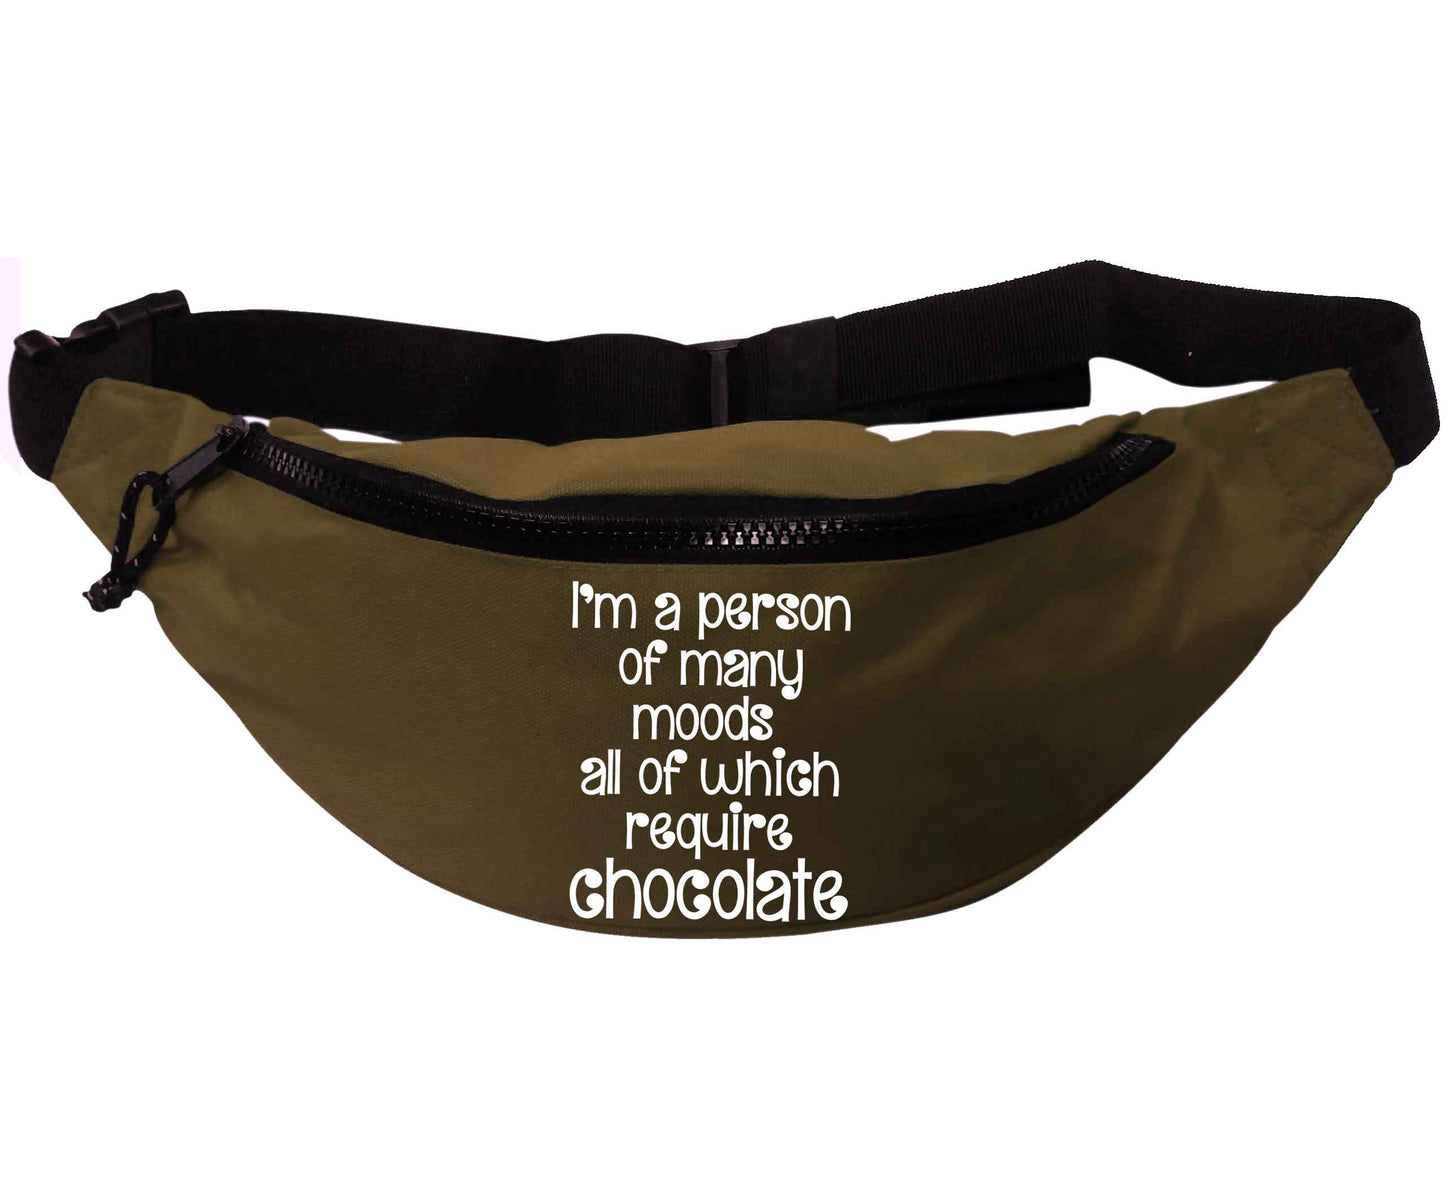 I'm a person of many moods all of which require chocolate | Recycled polyester bumbag